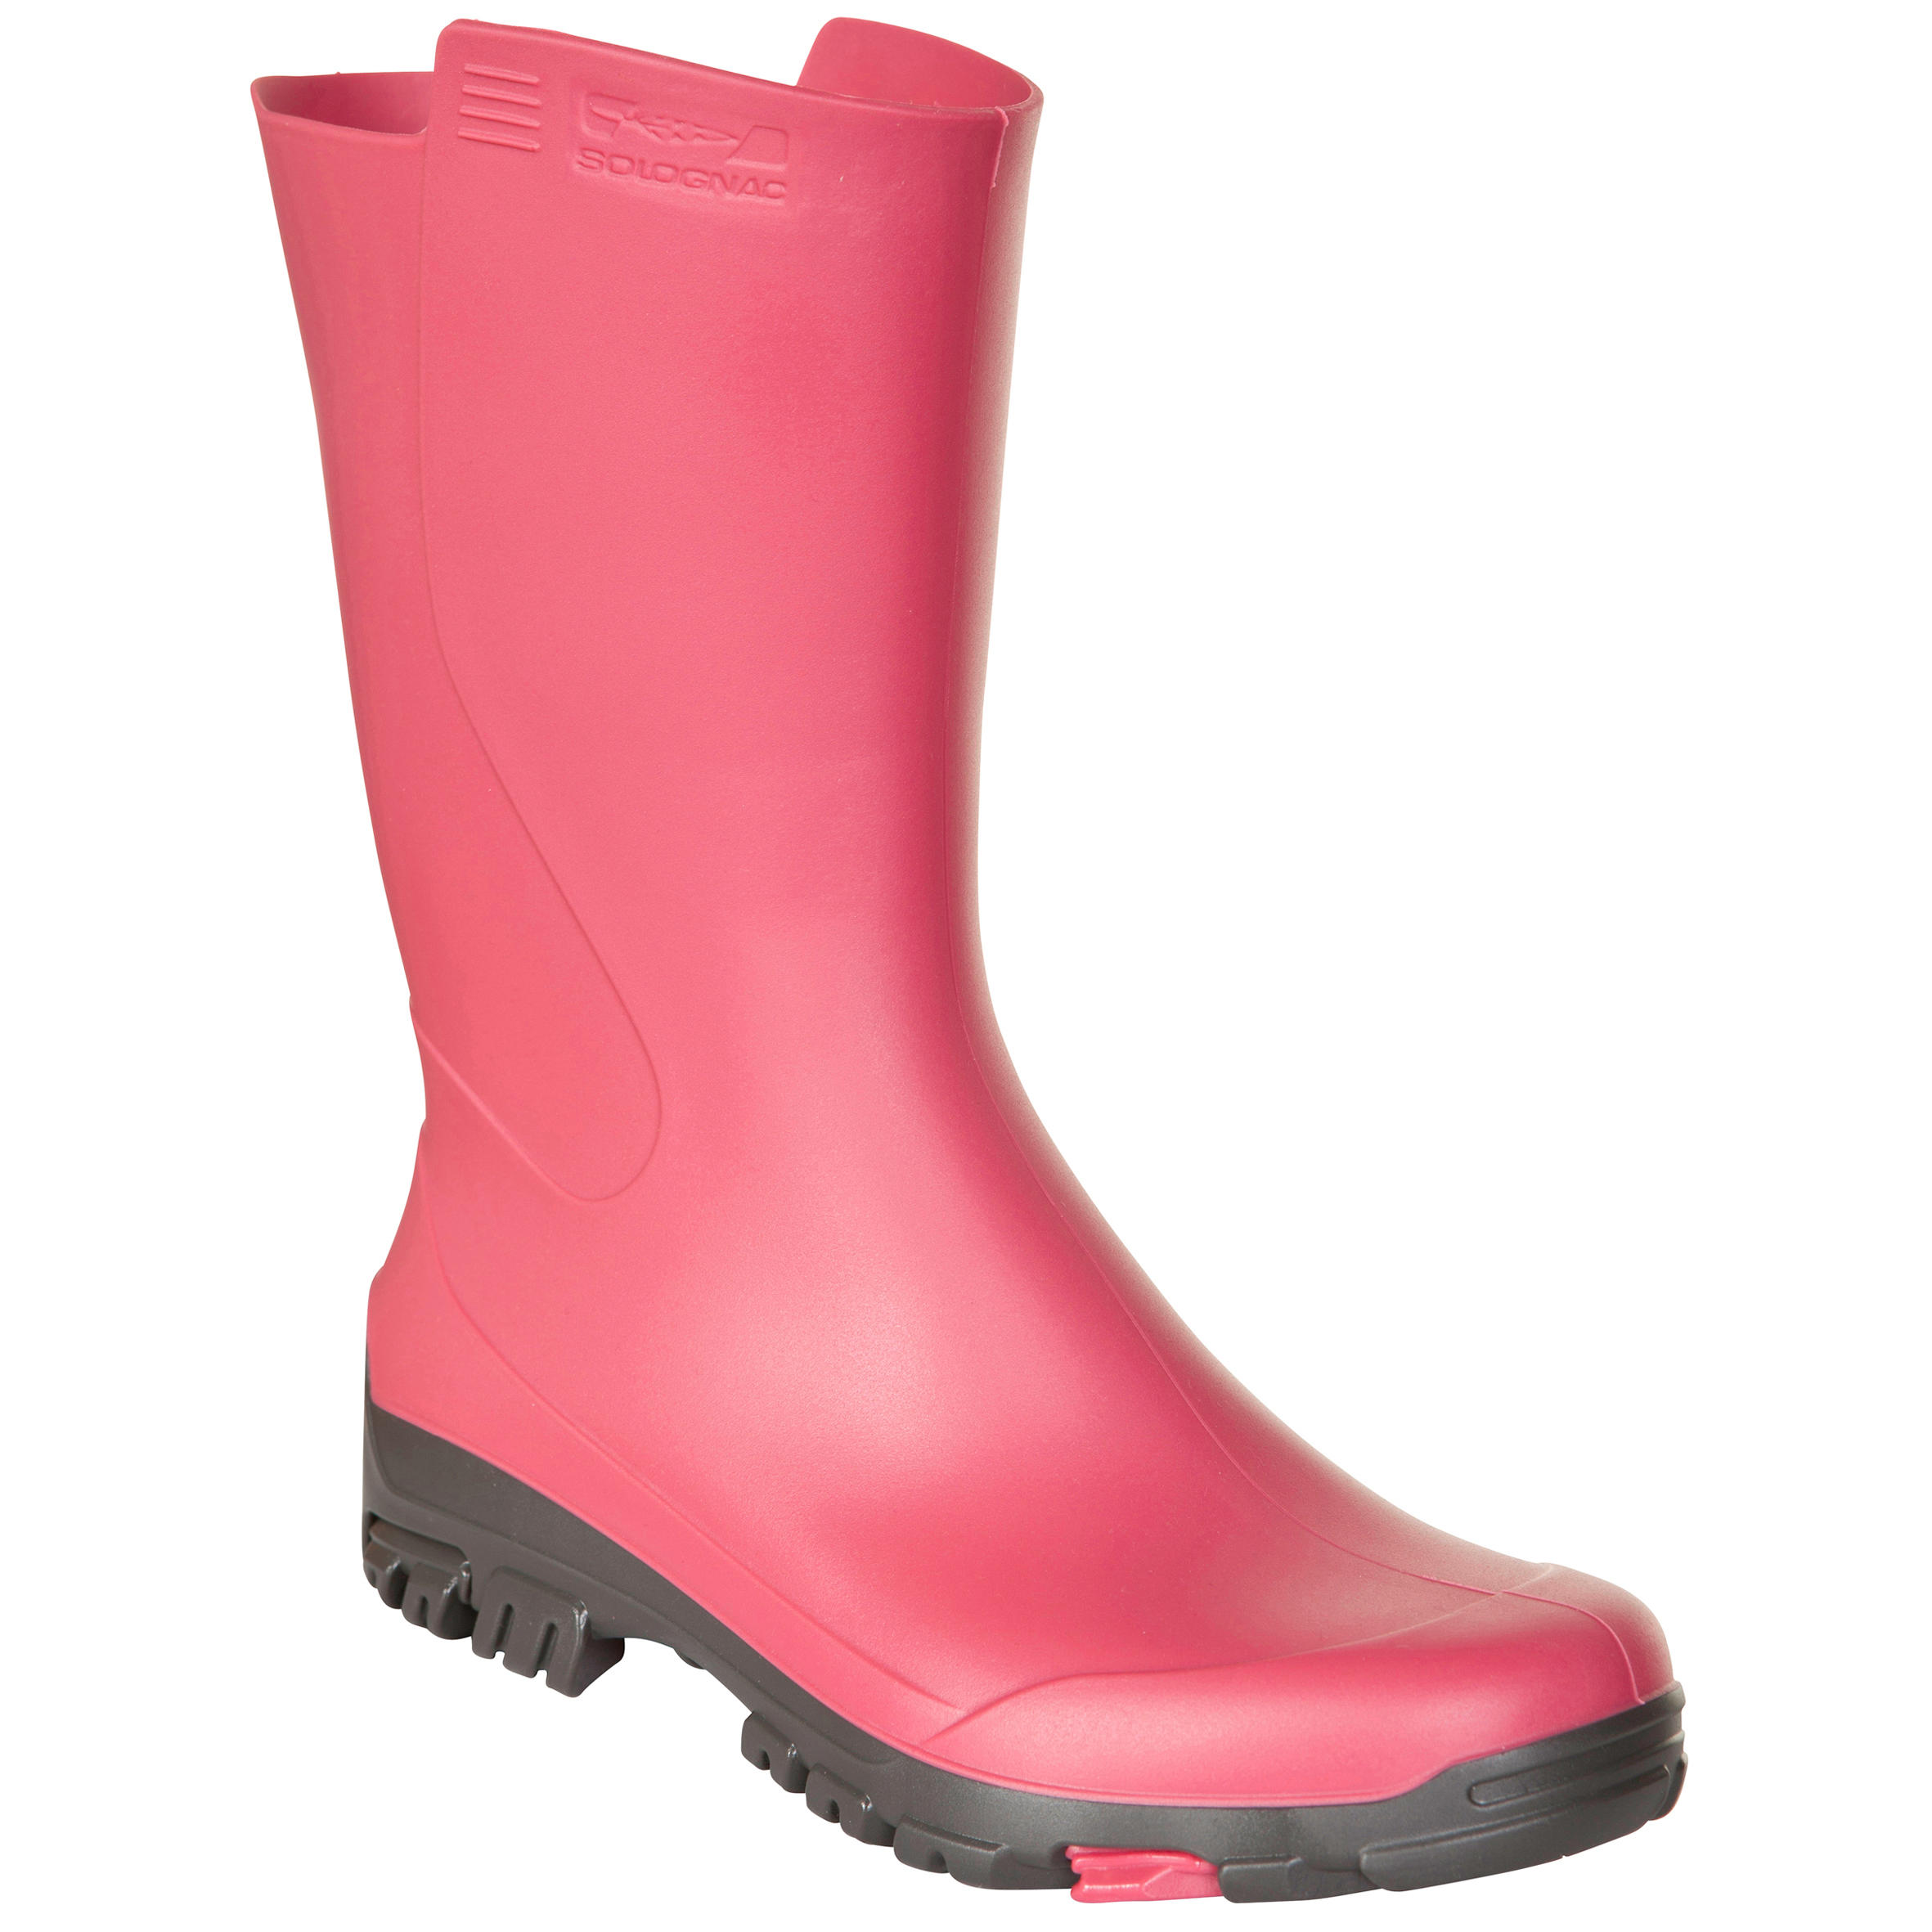 Inverness 100 Women's Ankle Boots - Pink 1/10